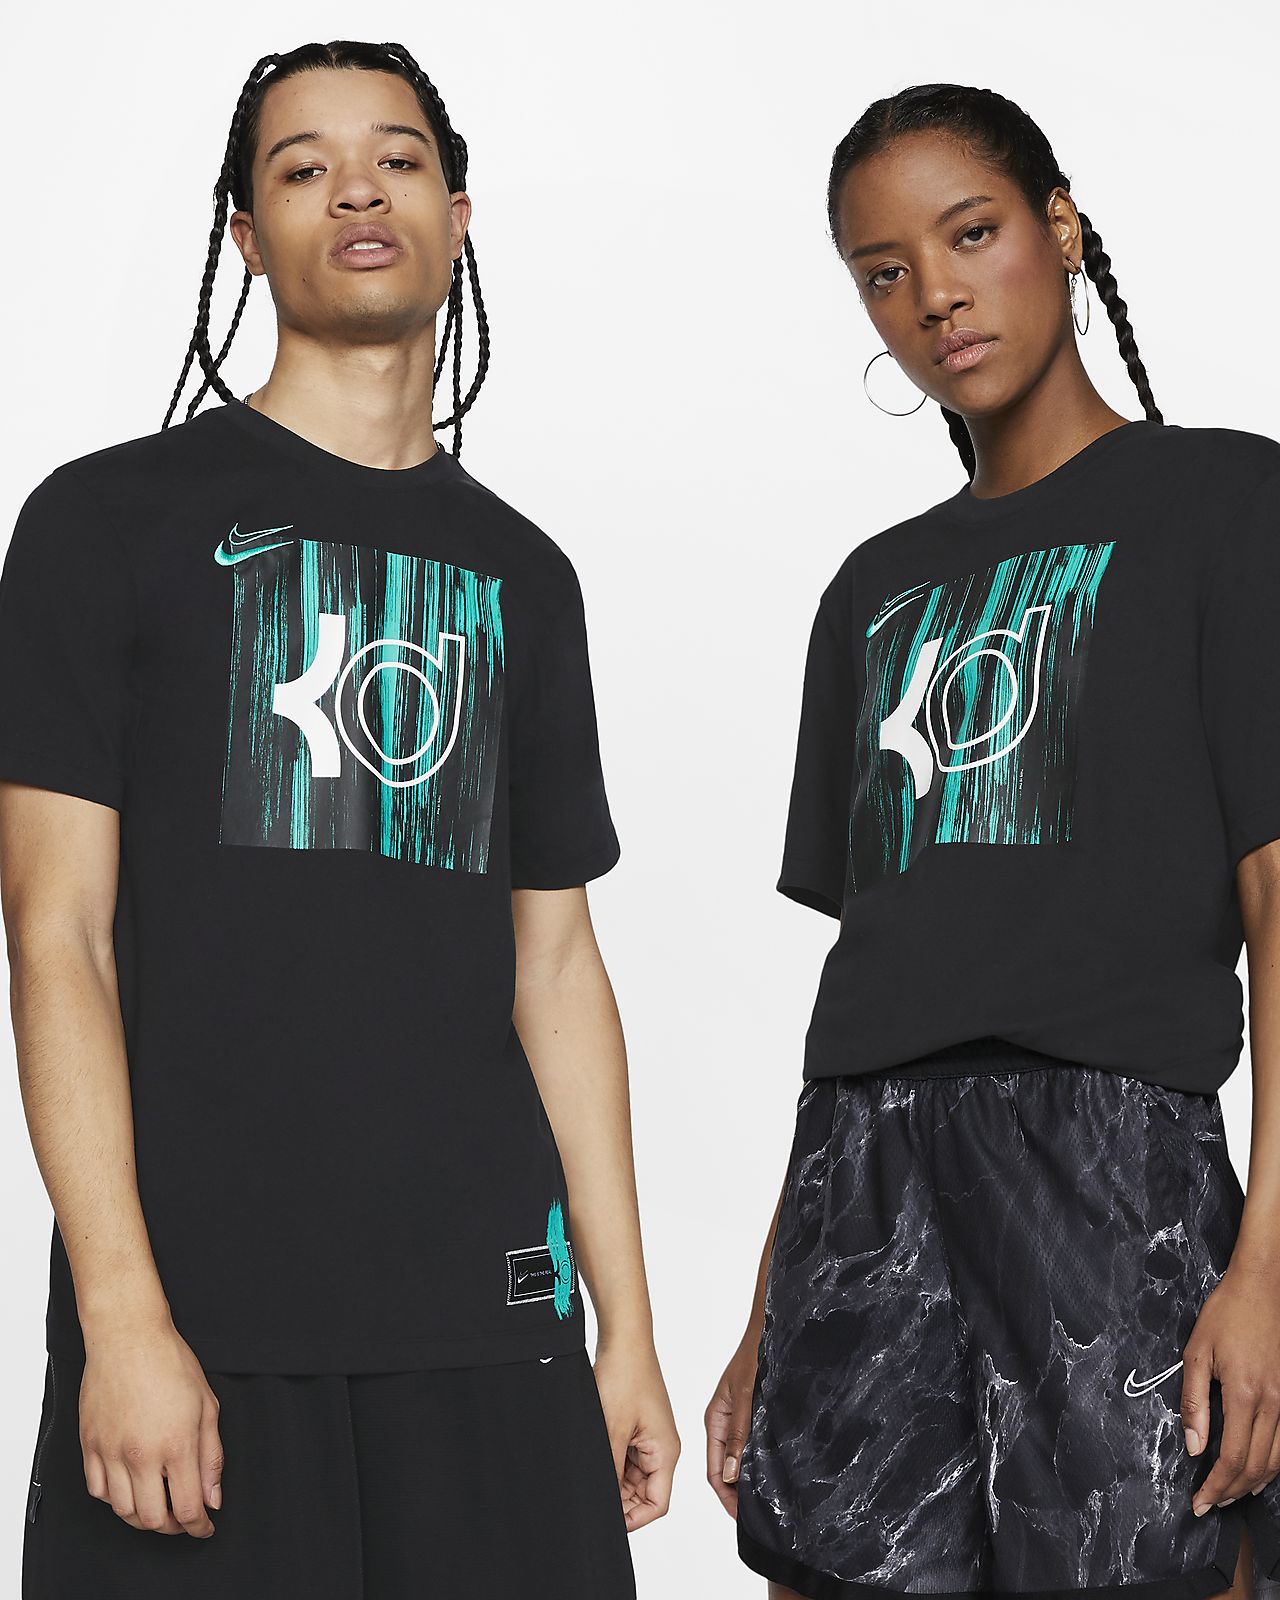 kd shirts for girls